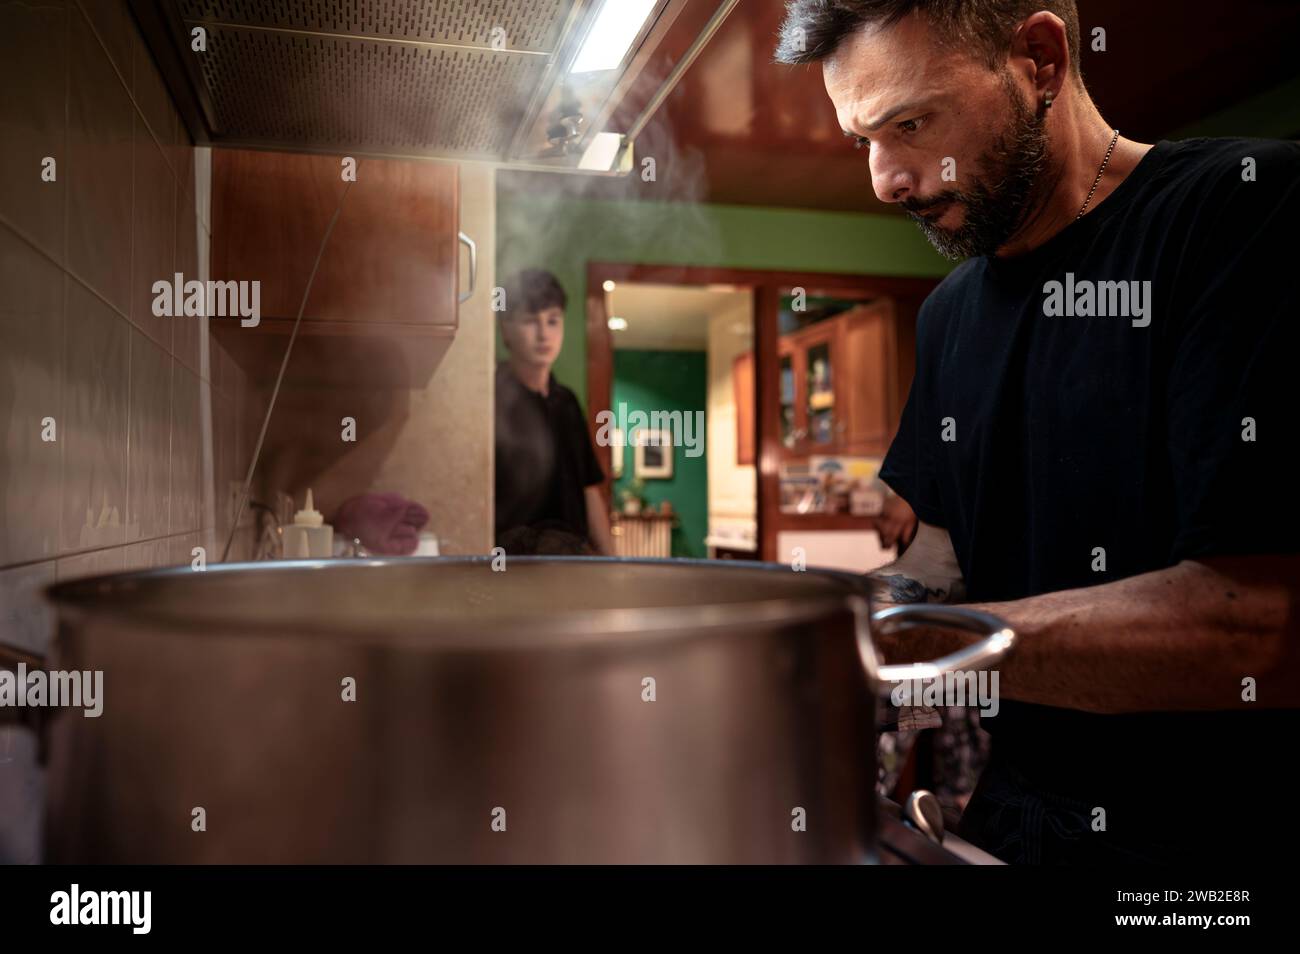 Cook working in a kitchen at a gastronomic event. Stock Photo